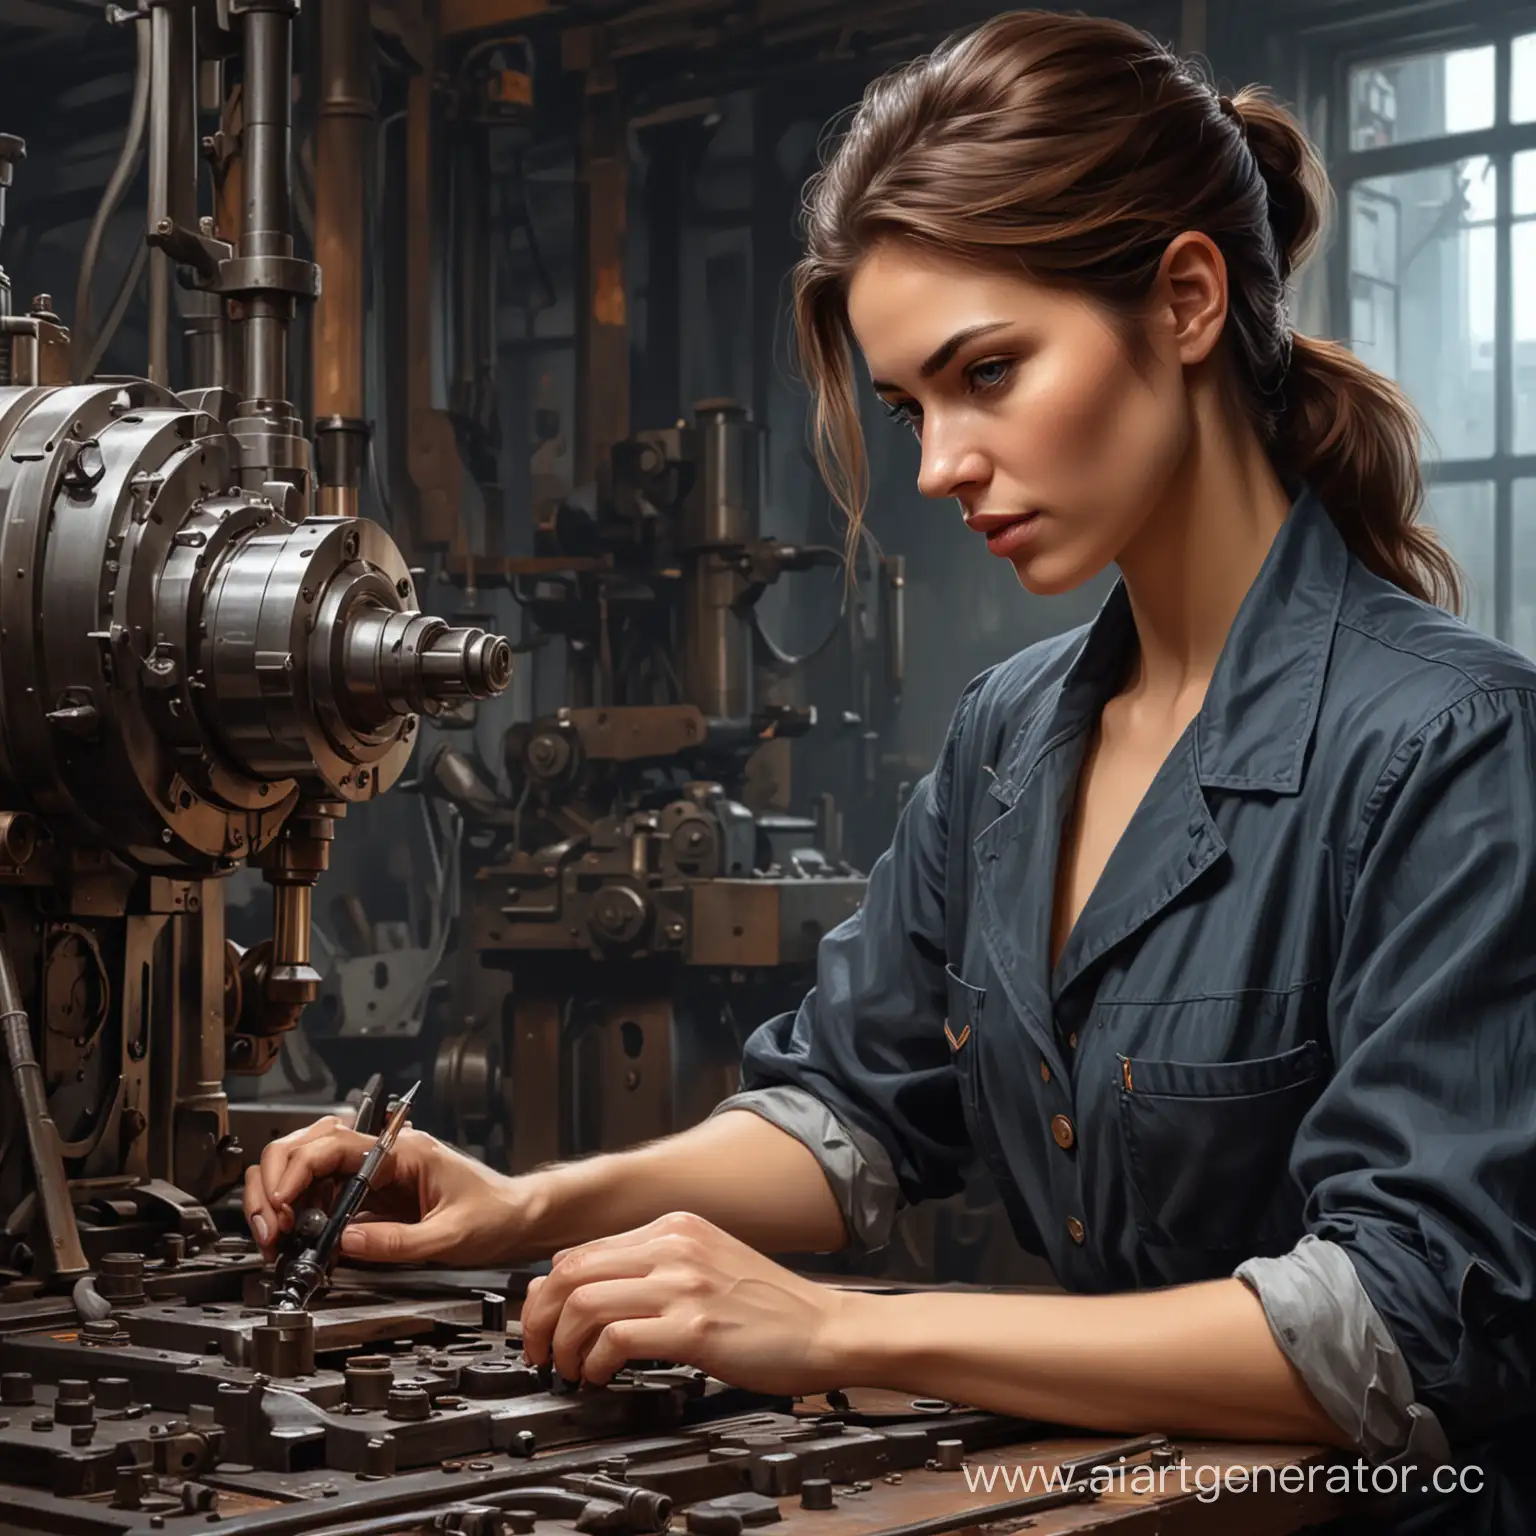 Female-Machinist-in-Action-Digital-Painting-Style